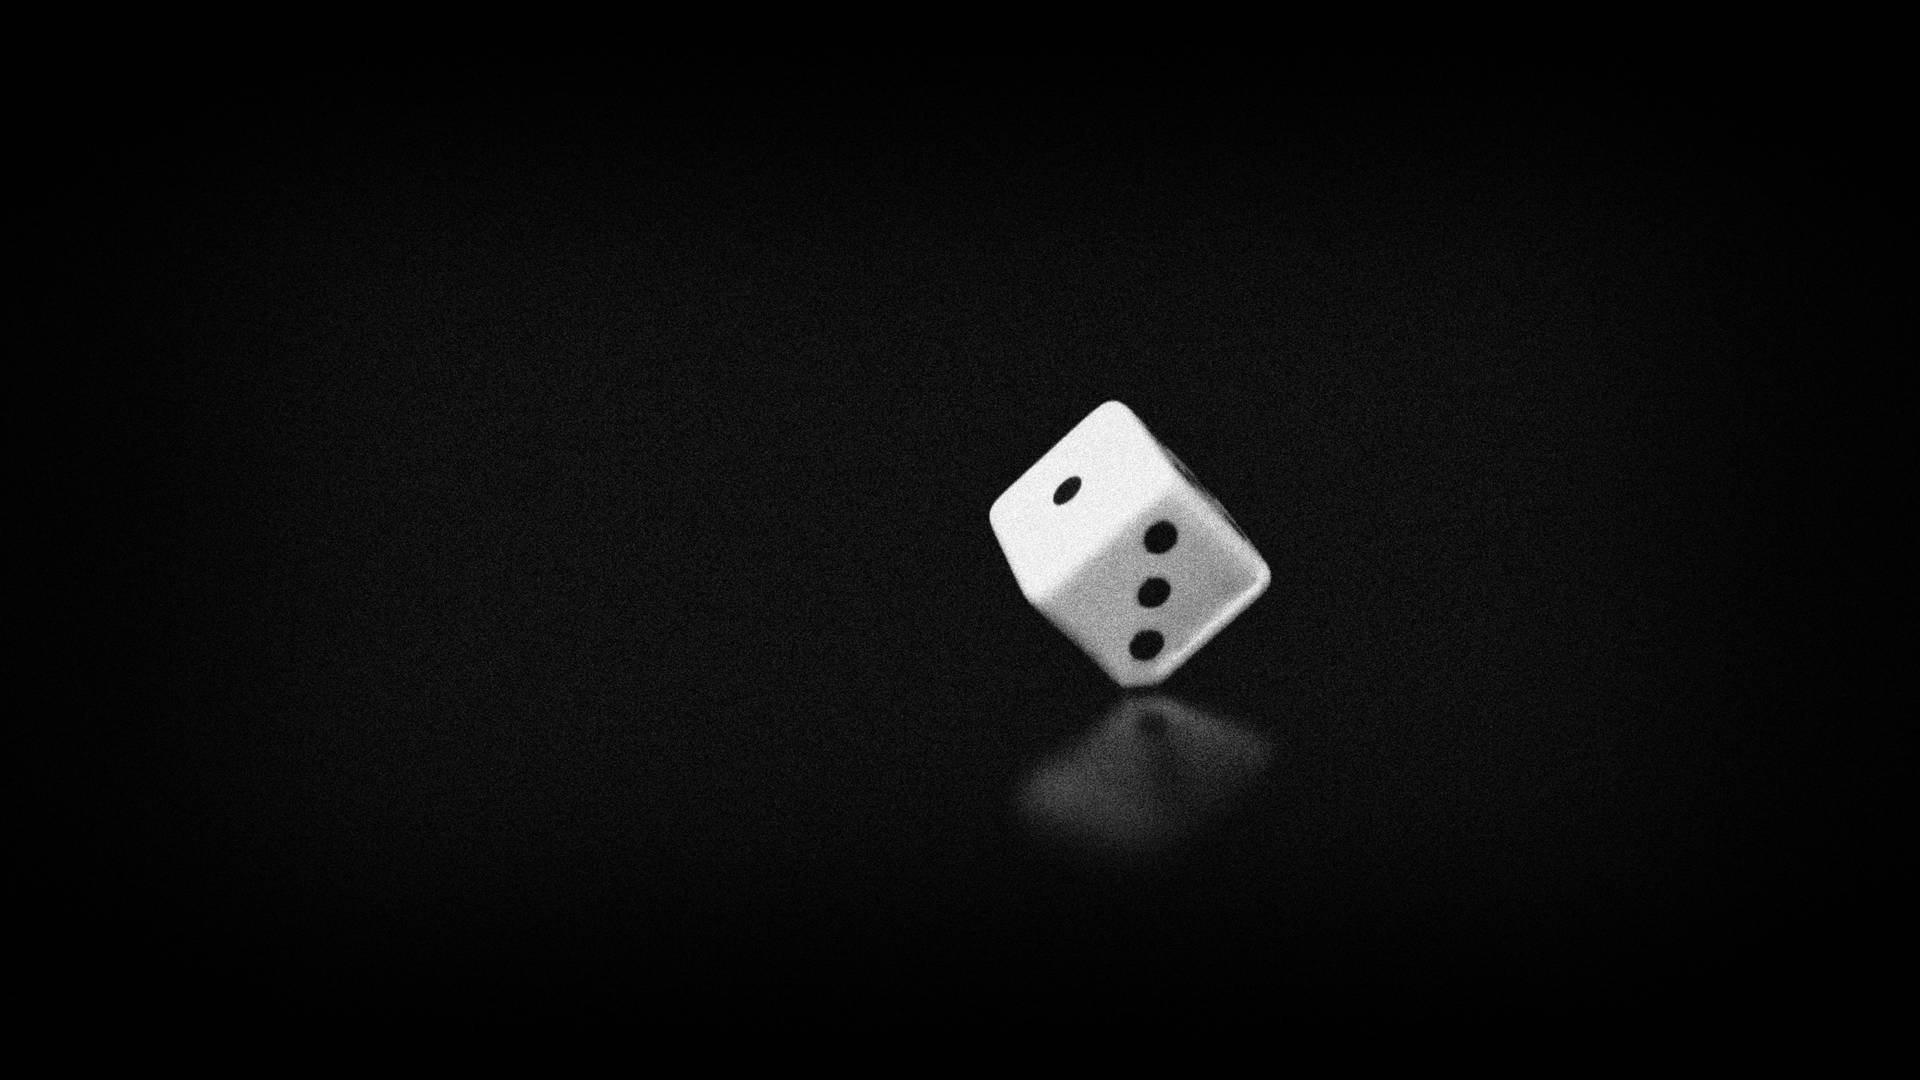 Intricate Black and White Dice in 4K Ultra HD Wallpaper